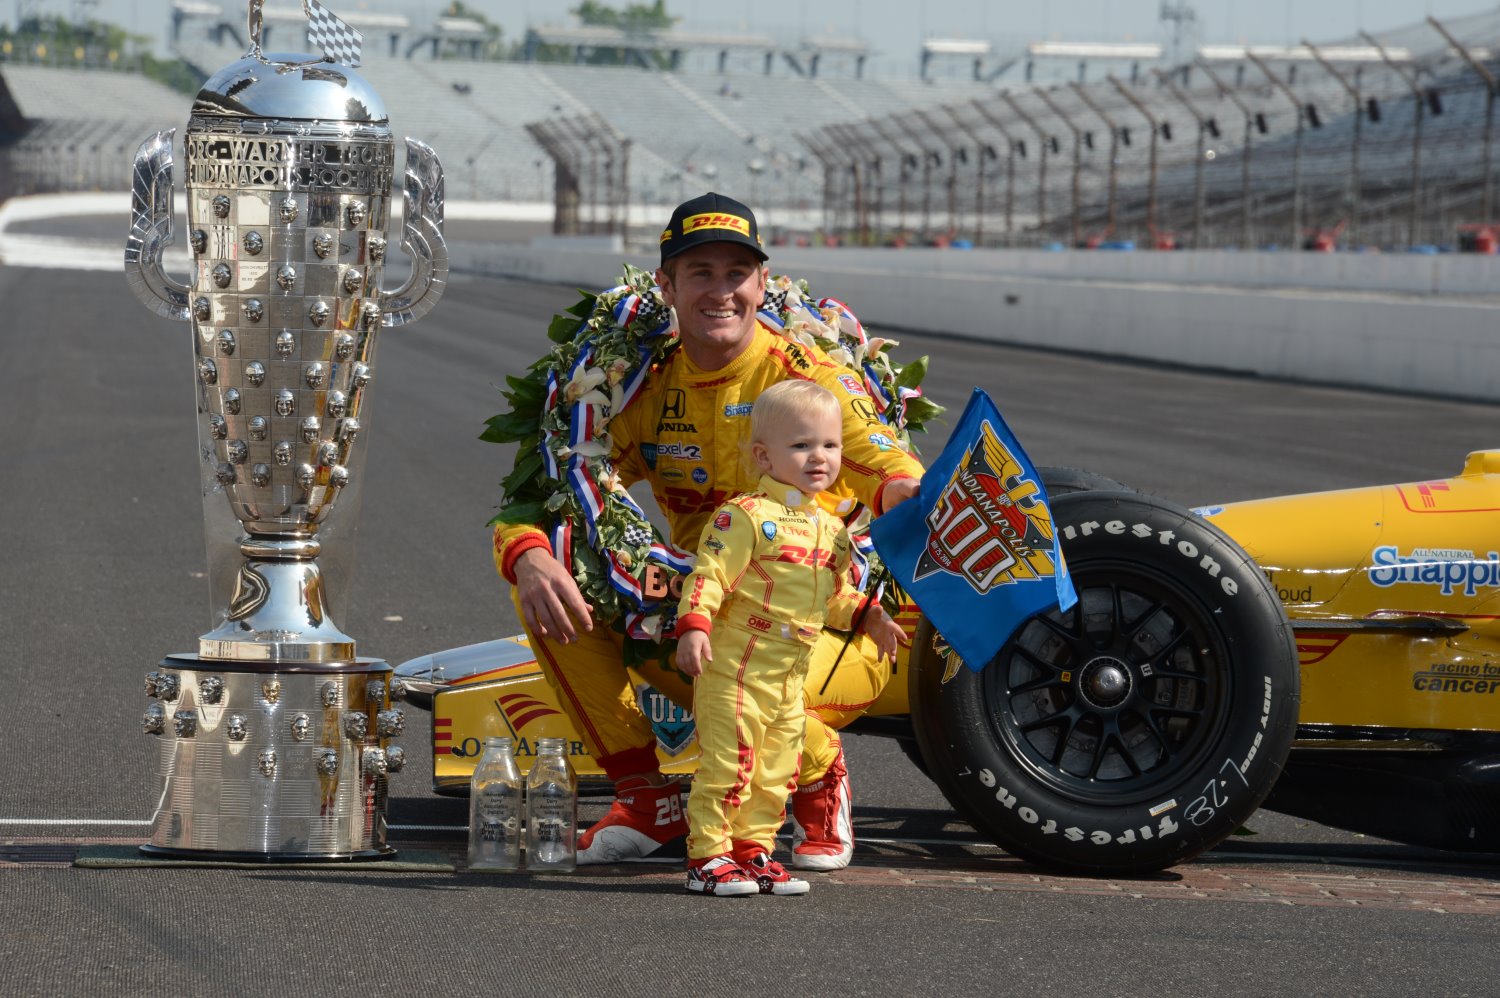 2014 Indy 500 winner Ryan Hunter-Reay with his son Ryden